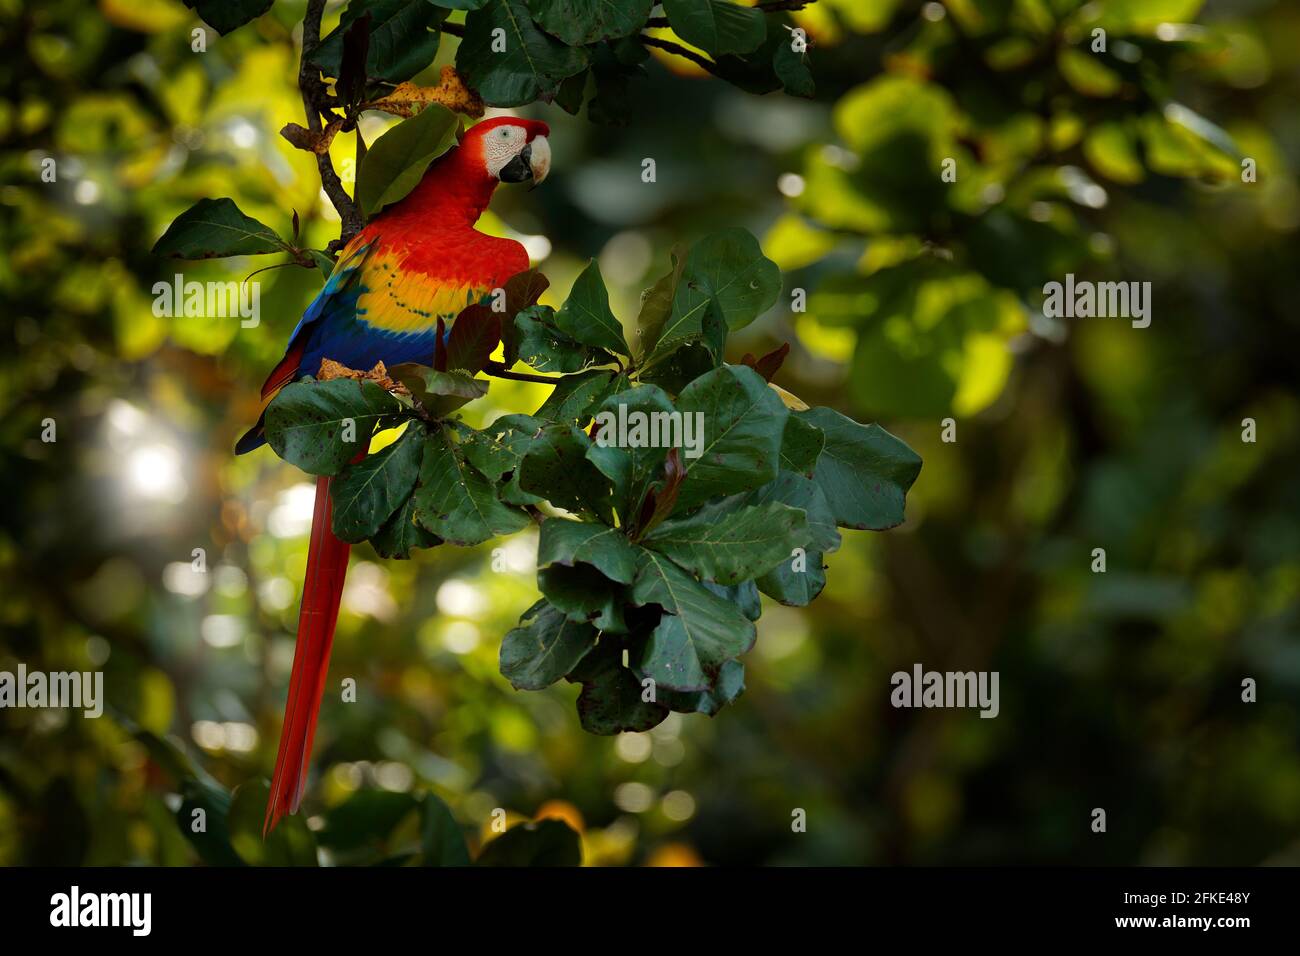 Beautiful parrot on tree green tree in nature habitat. Red parrot Scarlet Macaw, Ara macao, bird sitting on the branch, Costa rica. Wildlife scene fro Stock Photo